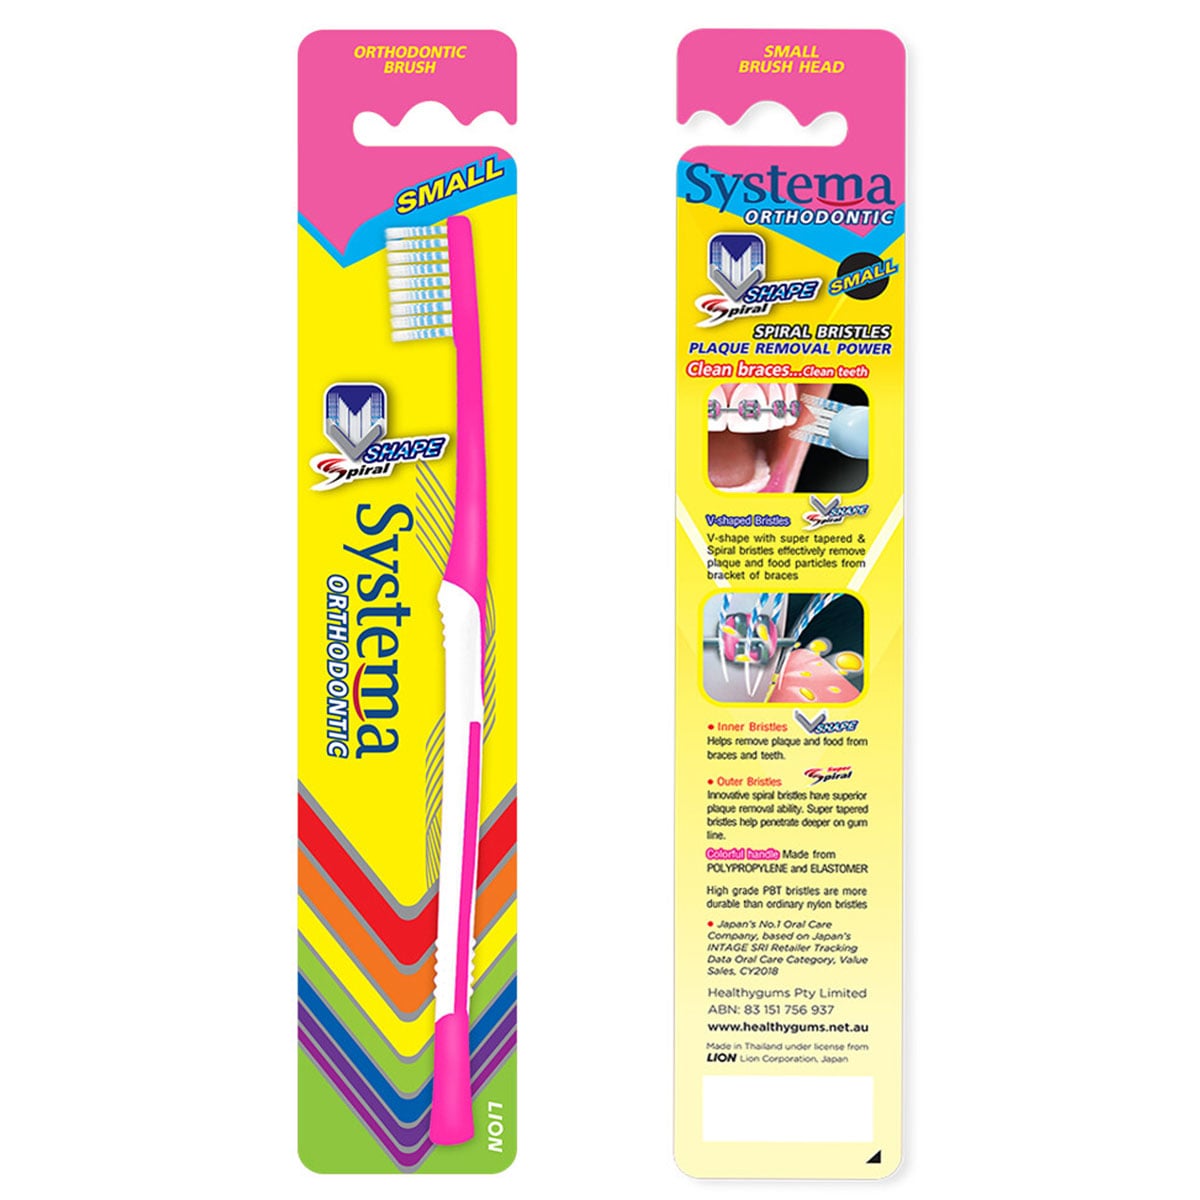 SYSTEMA Super Orthodontic Toothbrush